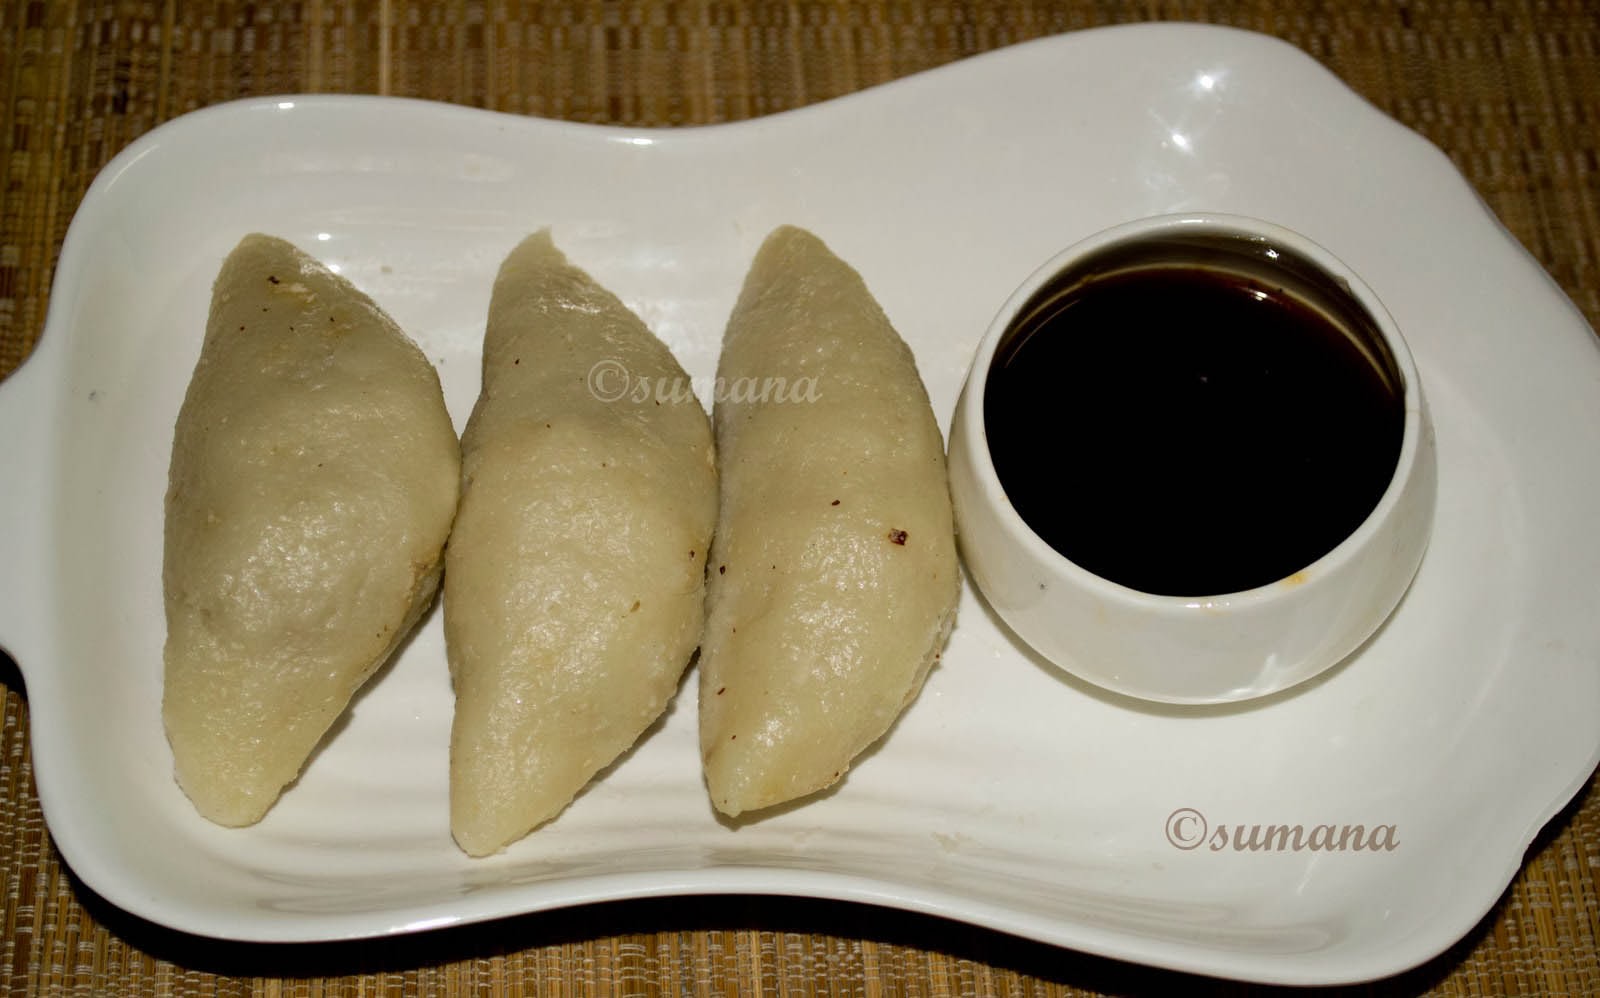 vapa pithe or puli pithe is a dumpling made of rice flour and coconut made by Bengalis during Poush Sankranti